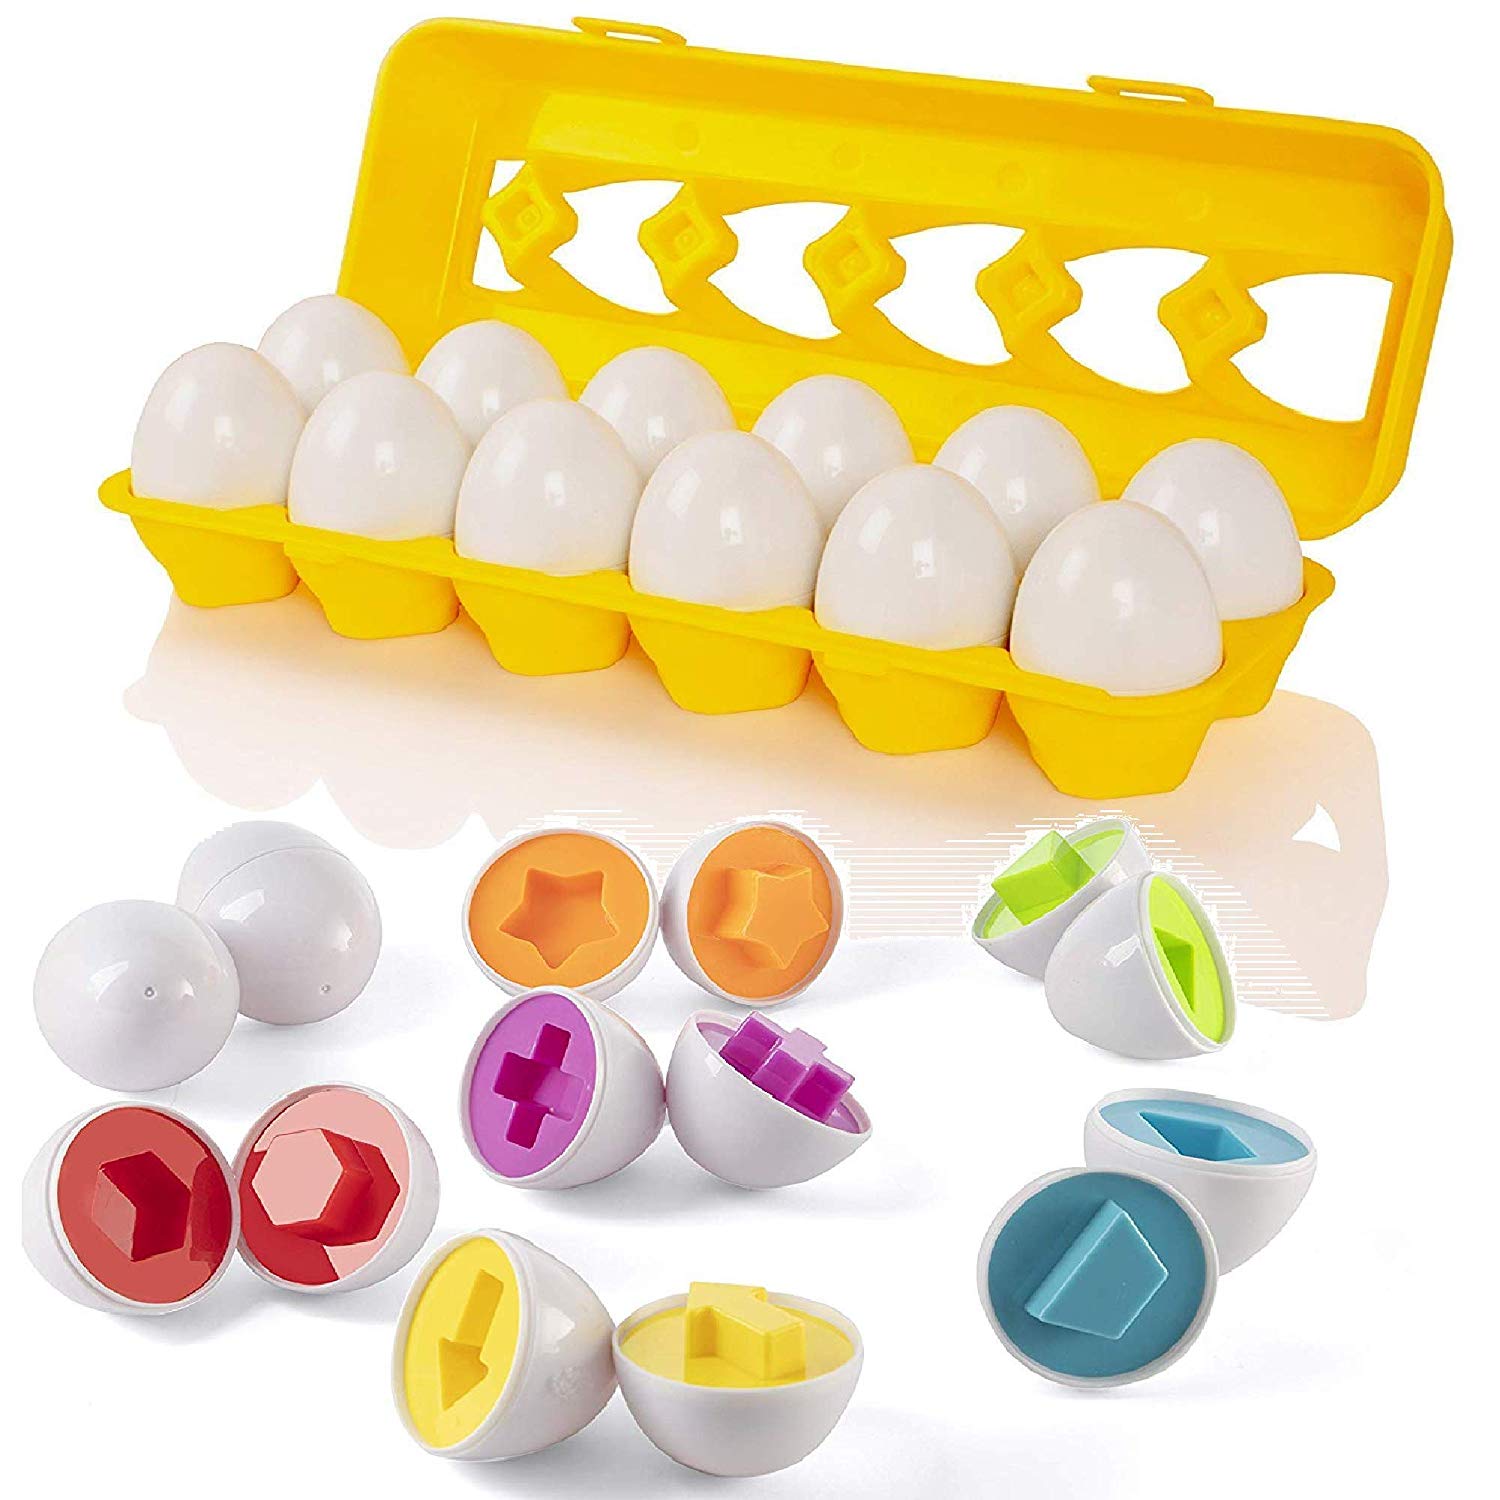 Easter Matching Eggs with Yellow Eggs Holder - STEM Toys Educational Toy for Kids